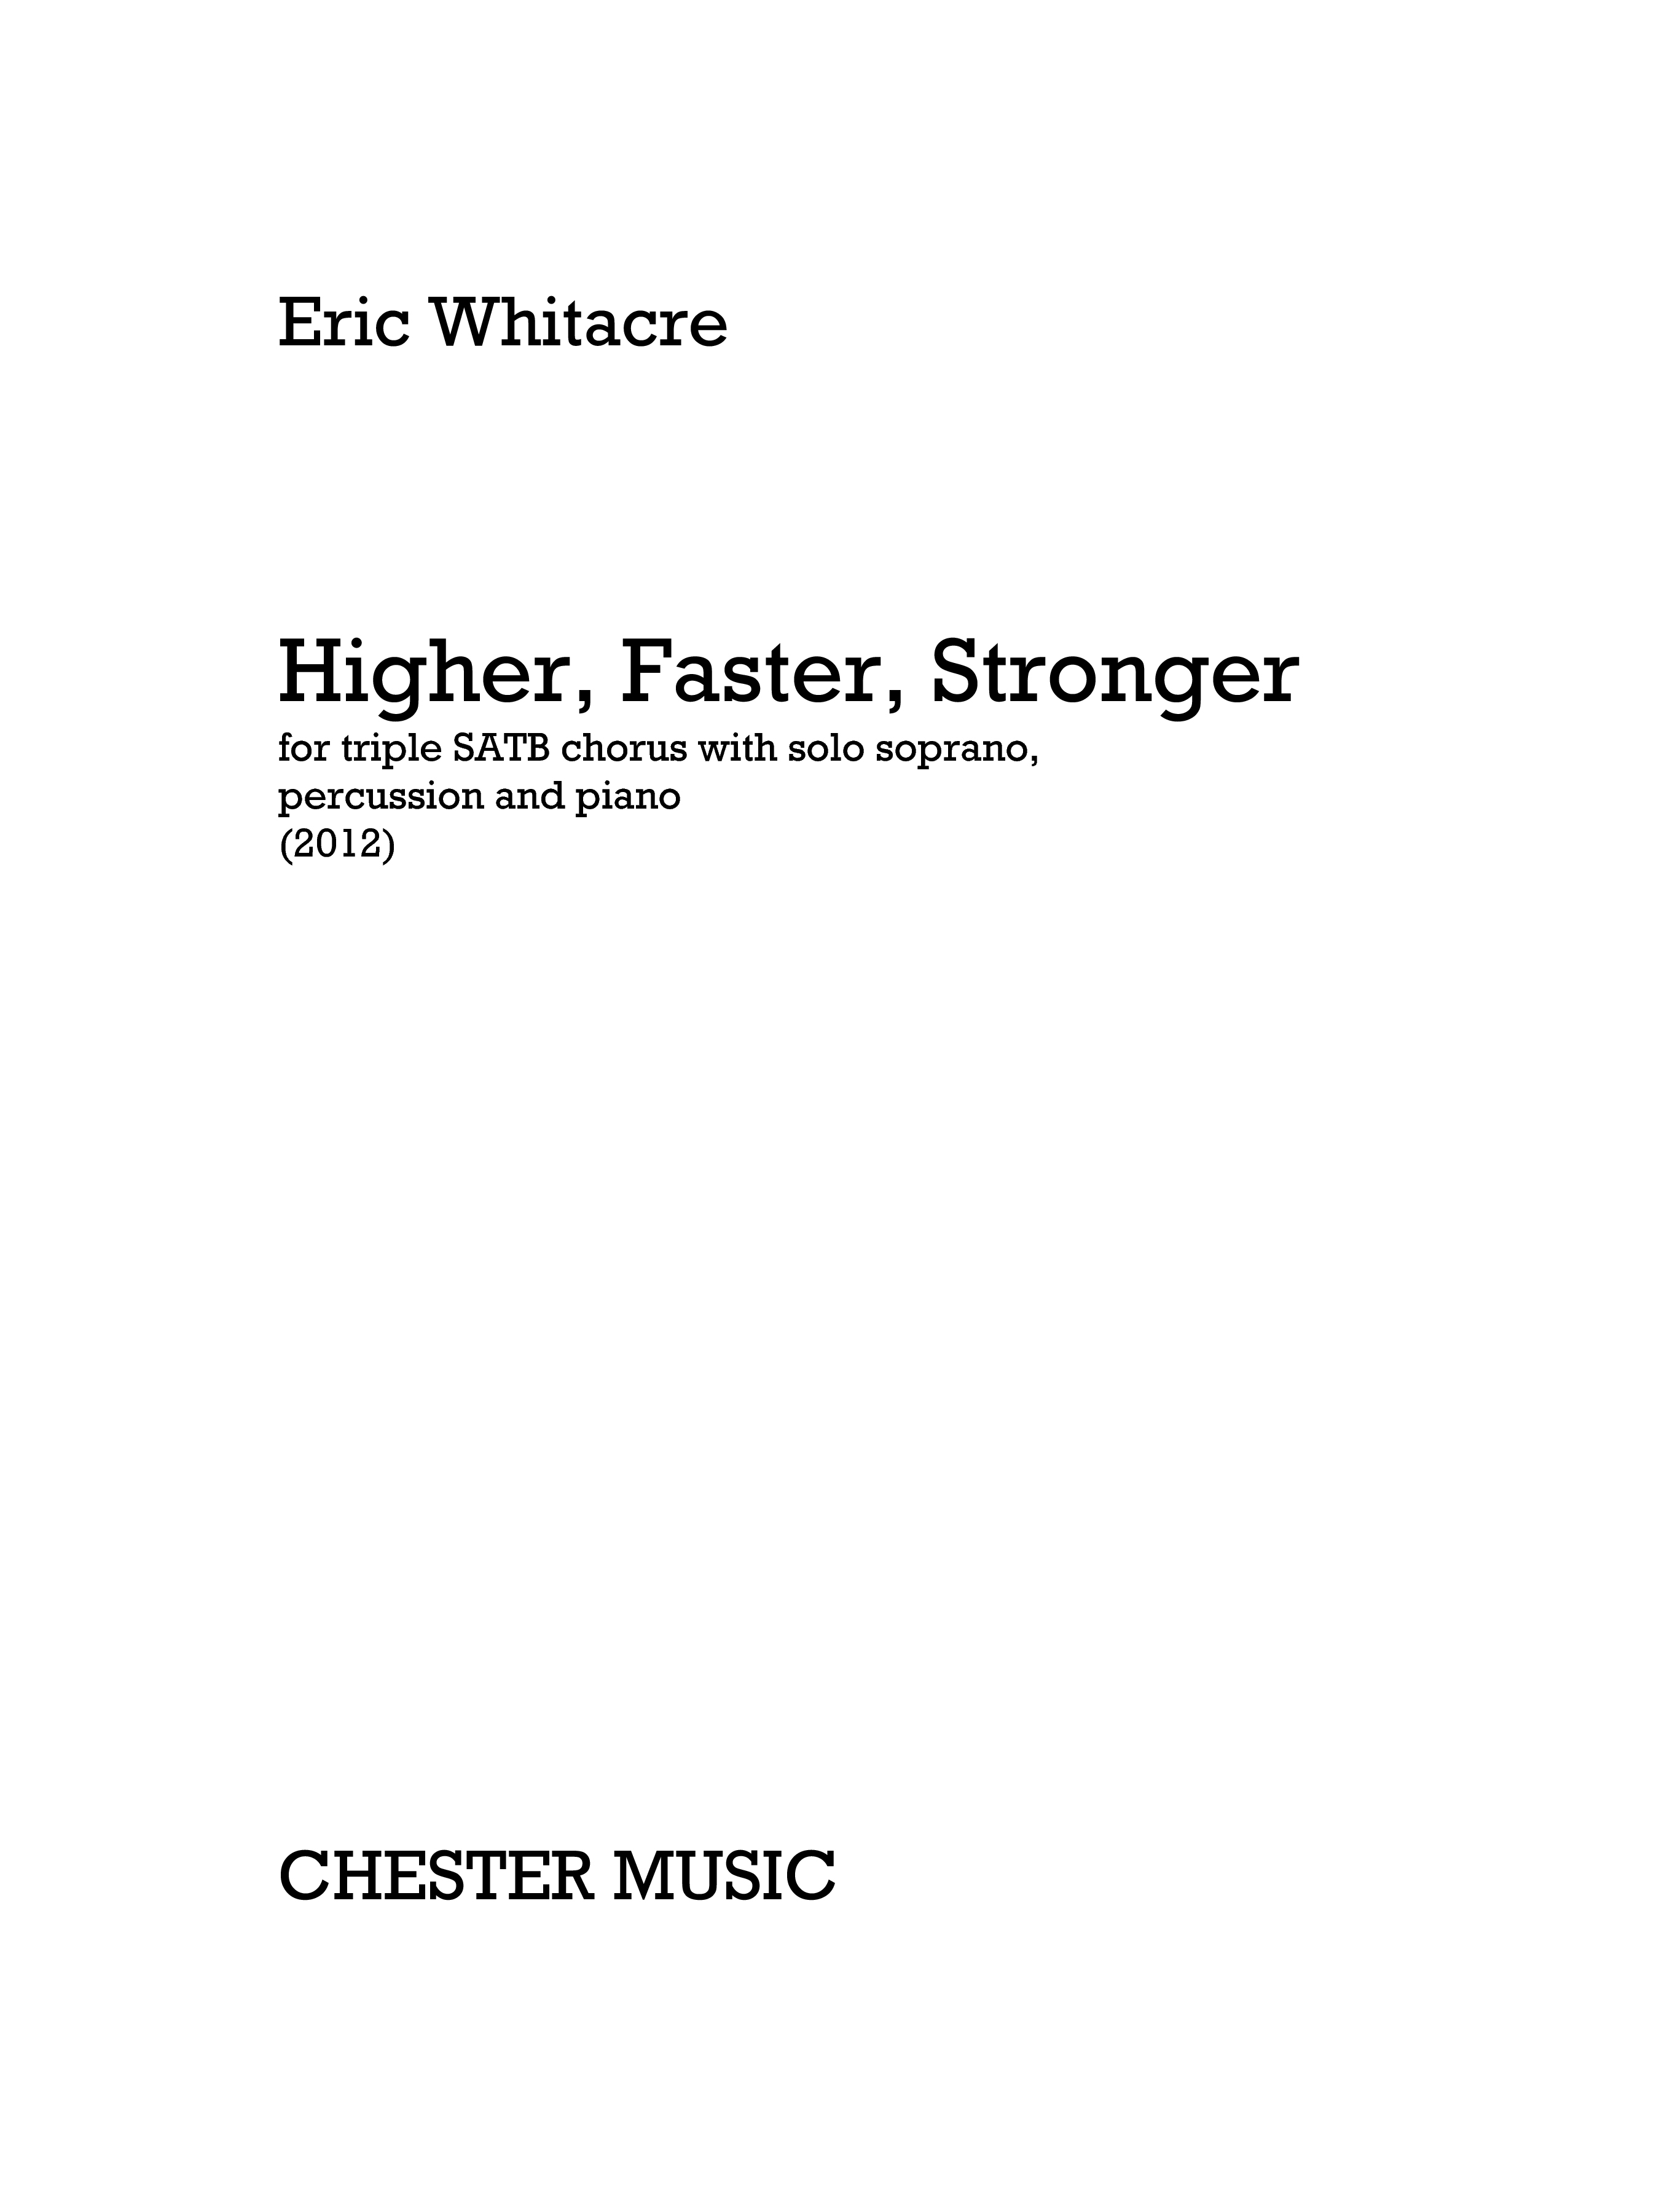 Eric Whitacre: Higher, Faster, Stronger (Percussion/Piano Parts)